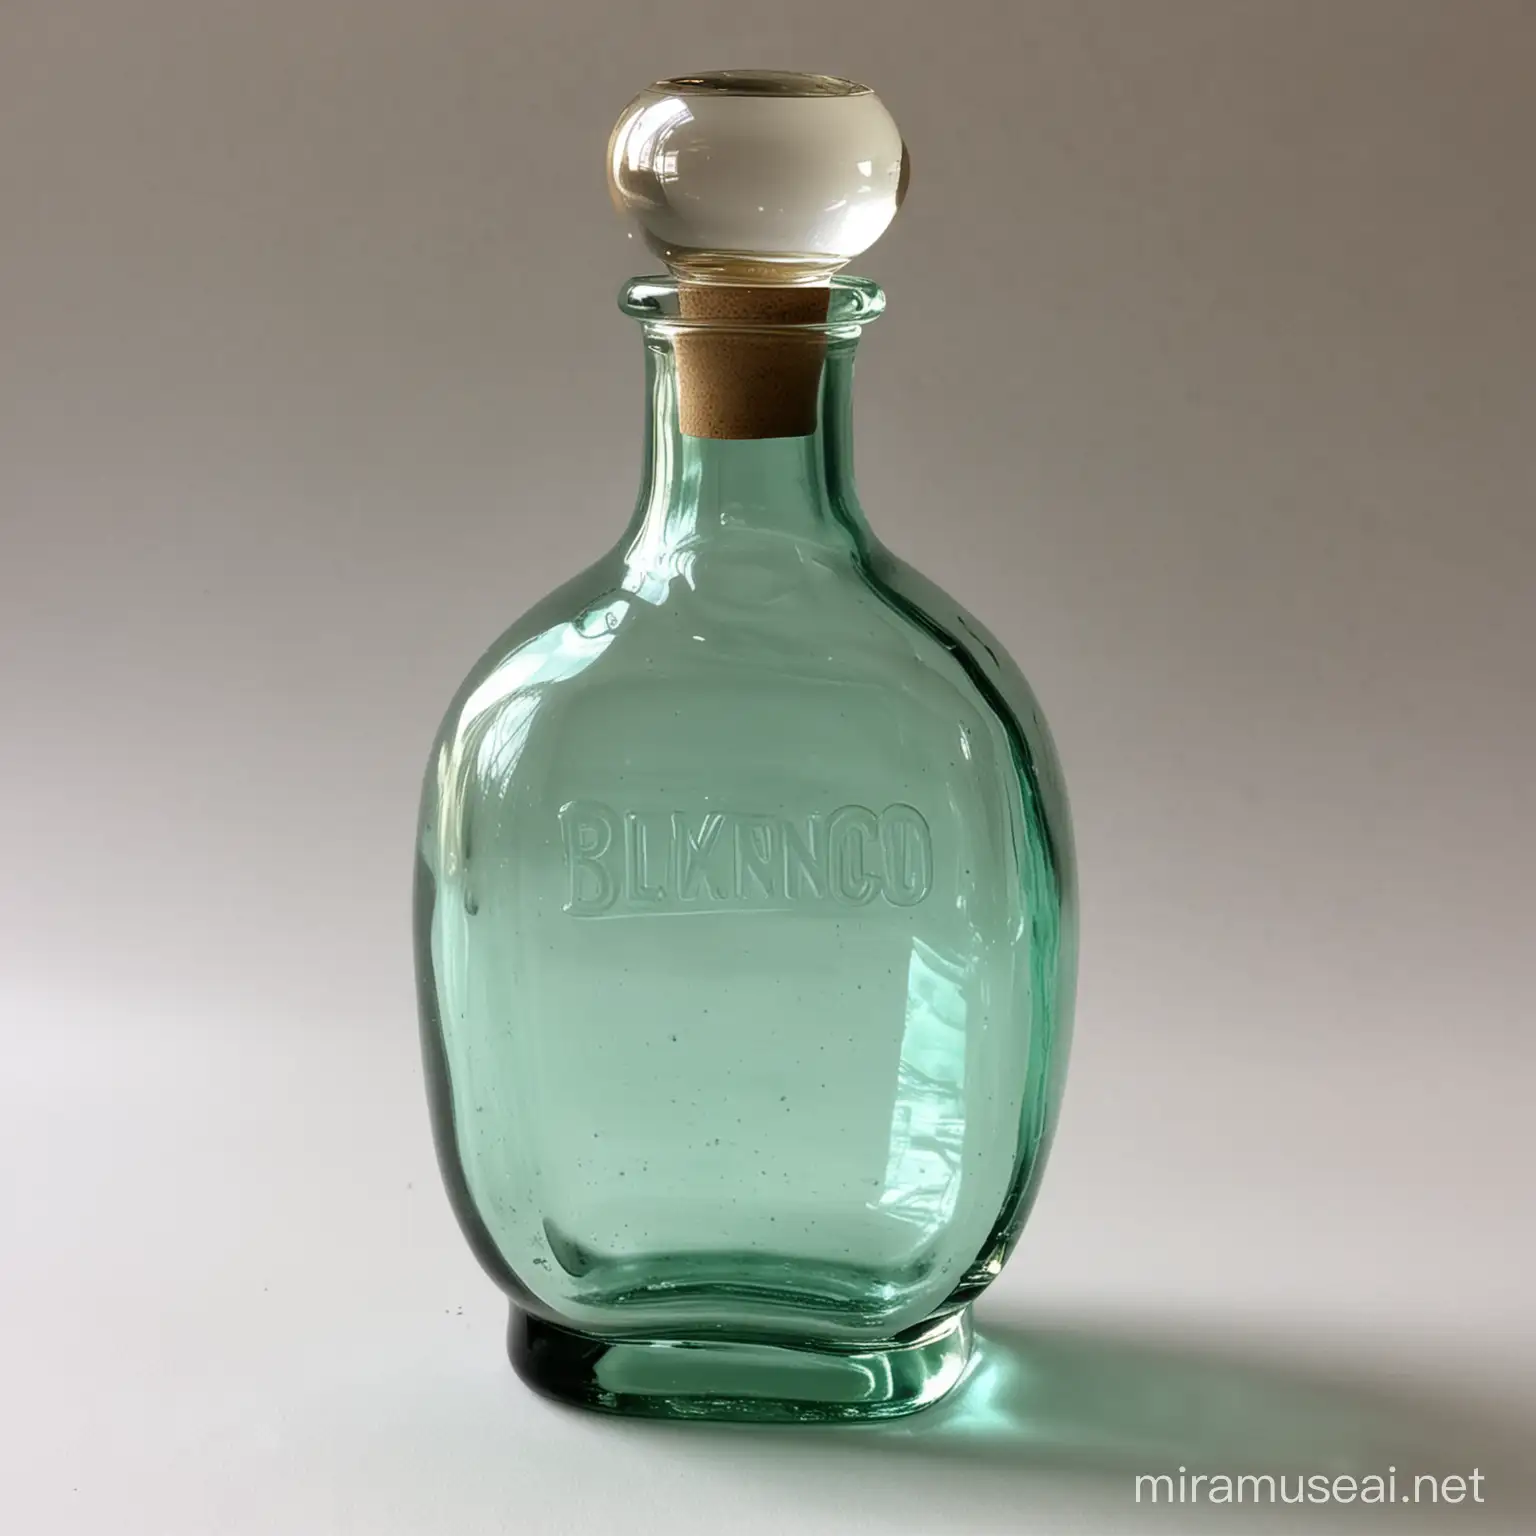 Blenko glass company, fragrance bottle, vintage, imperfections, timeless, nostalgic, qualitative, in the details, interesting mix of materials
